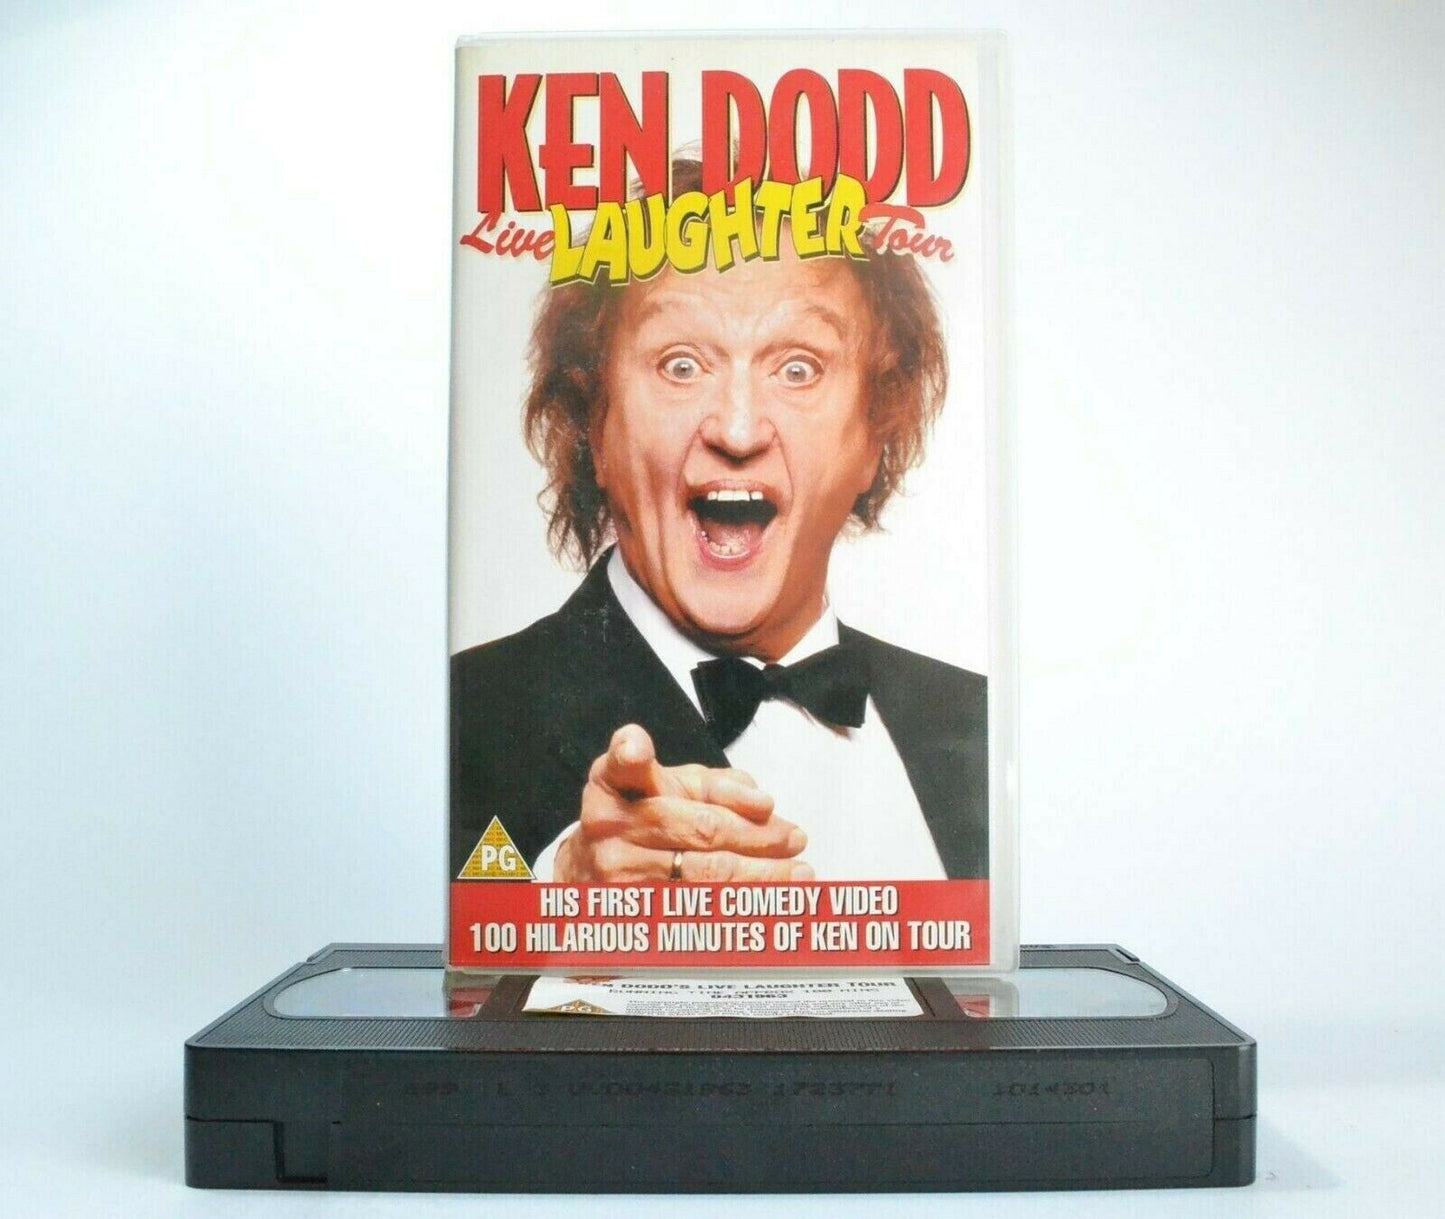 Ken Dodd: Live Laughter Tour - Stand-Up - Classic Comedy Routines - Pal VHS-